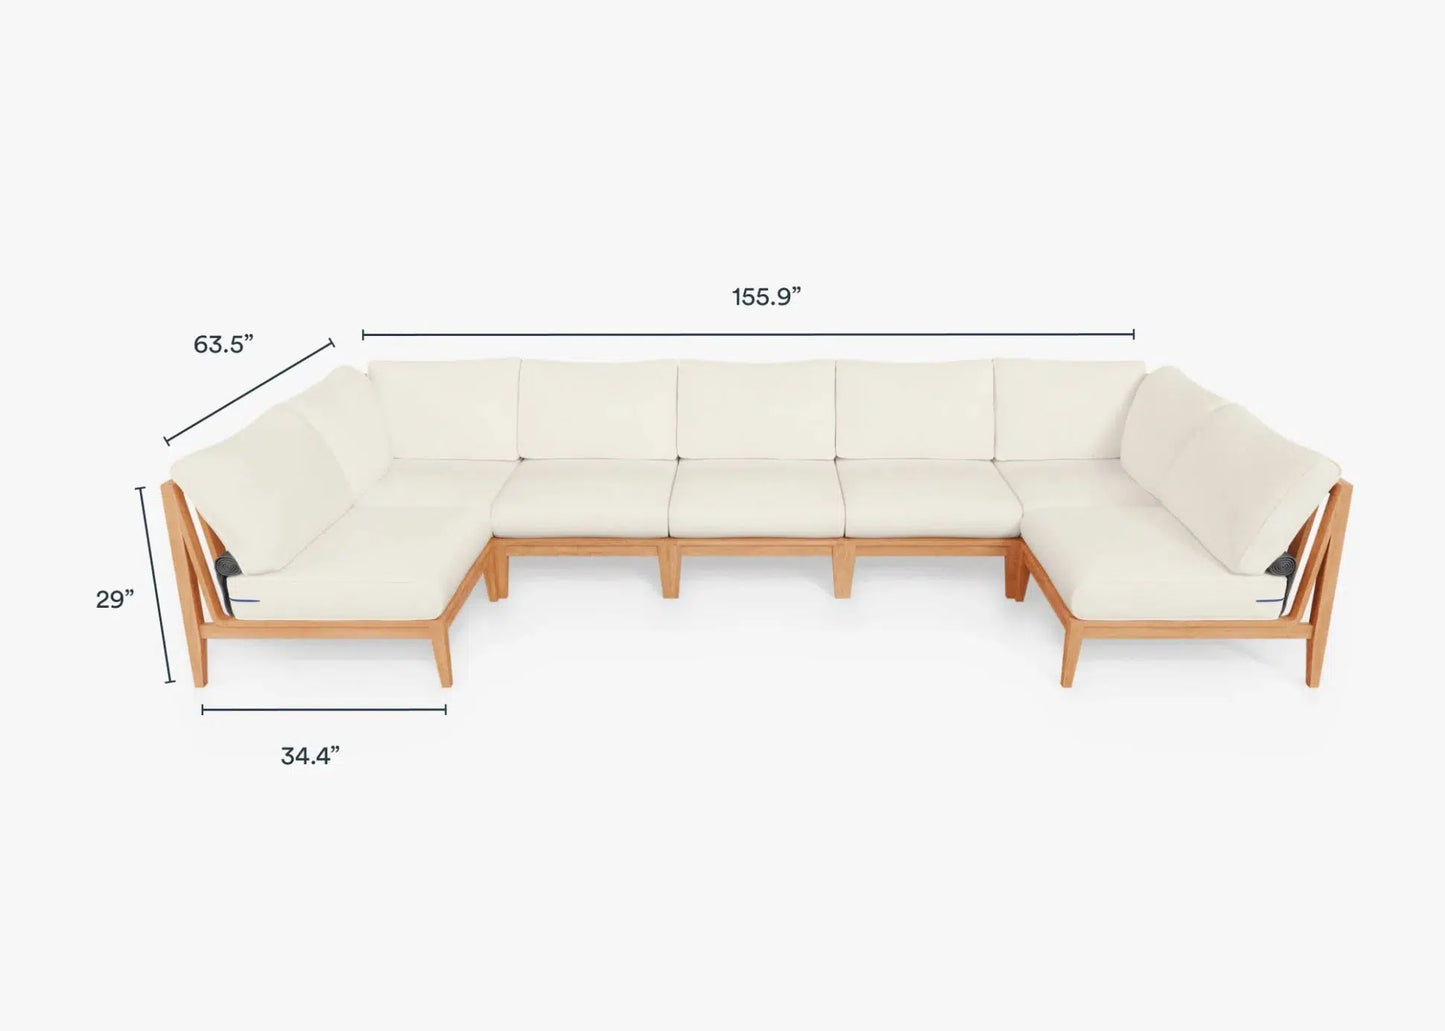 Live Outer 156" x 64" Teak Outdoor U Shape Sectional 7-Seat With Palisades Cream Cushion